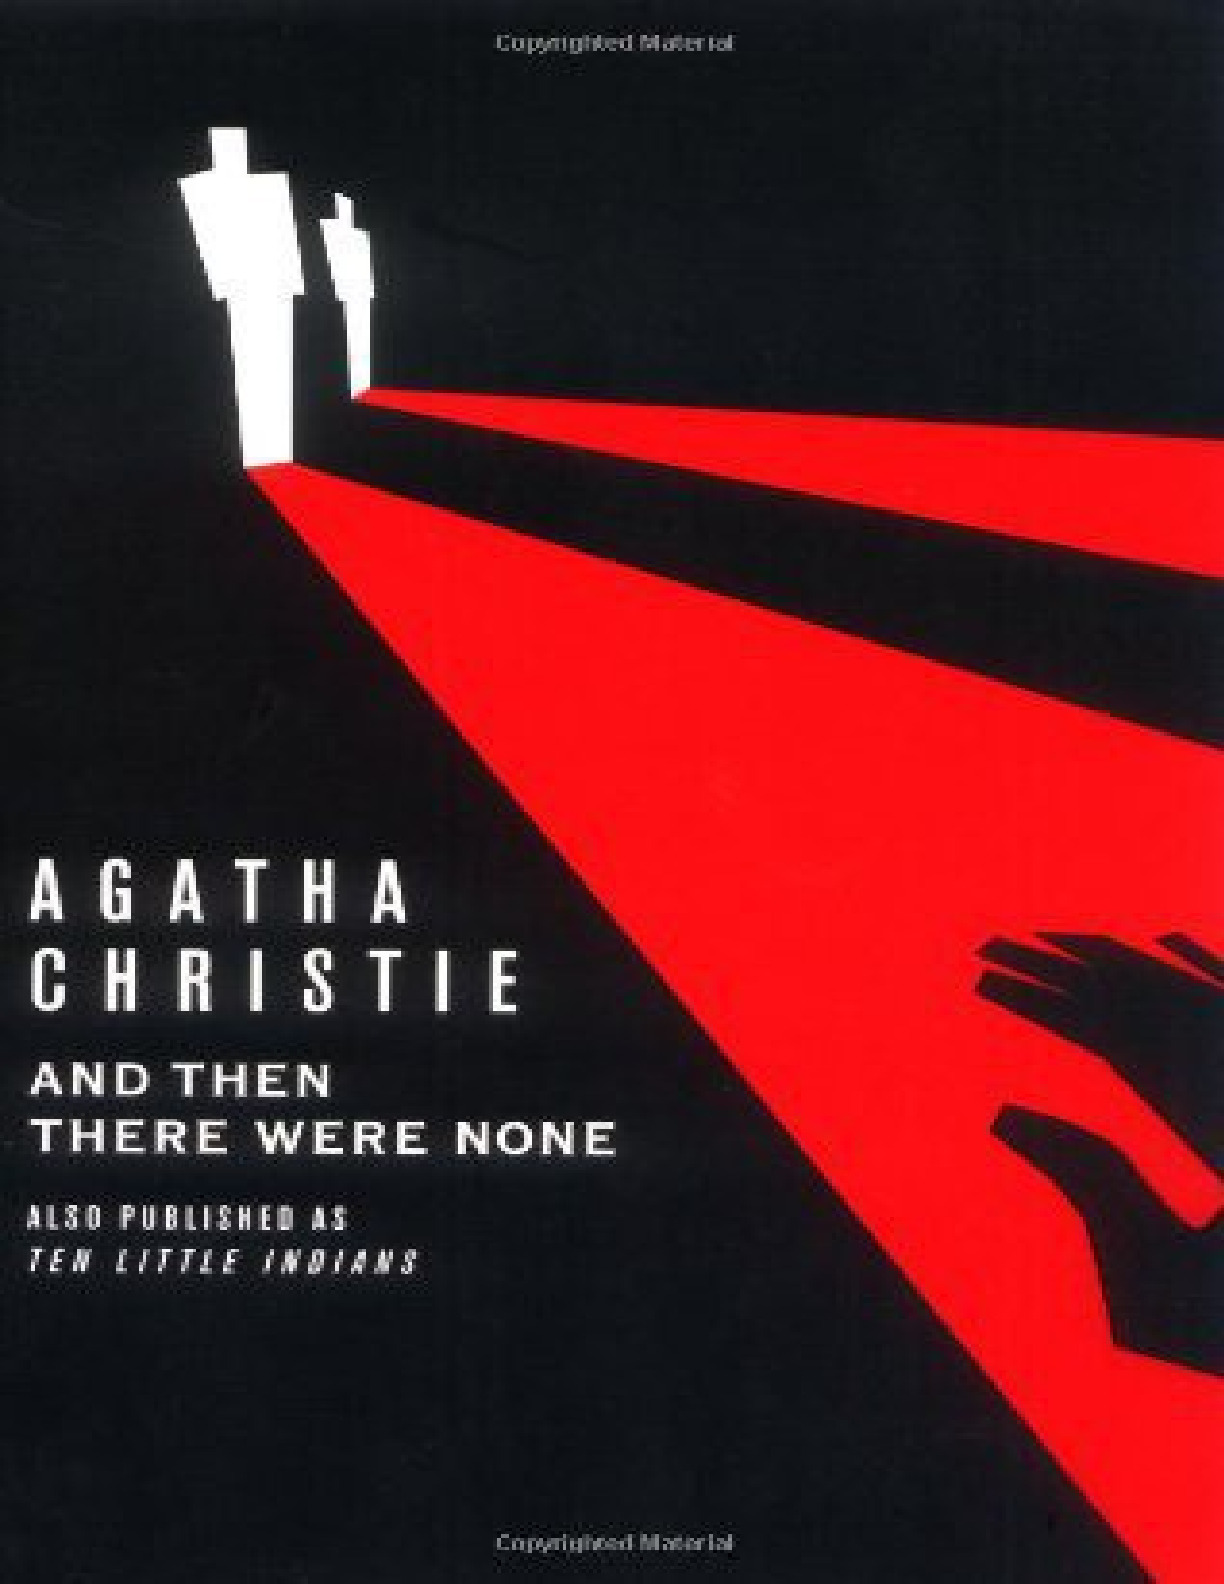 And then there were none – Agatha Christie